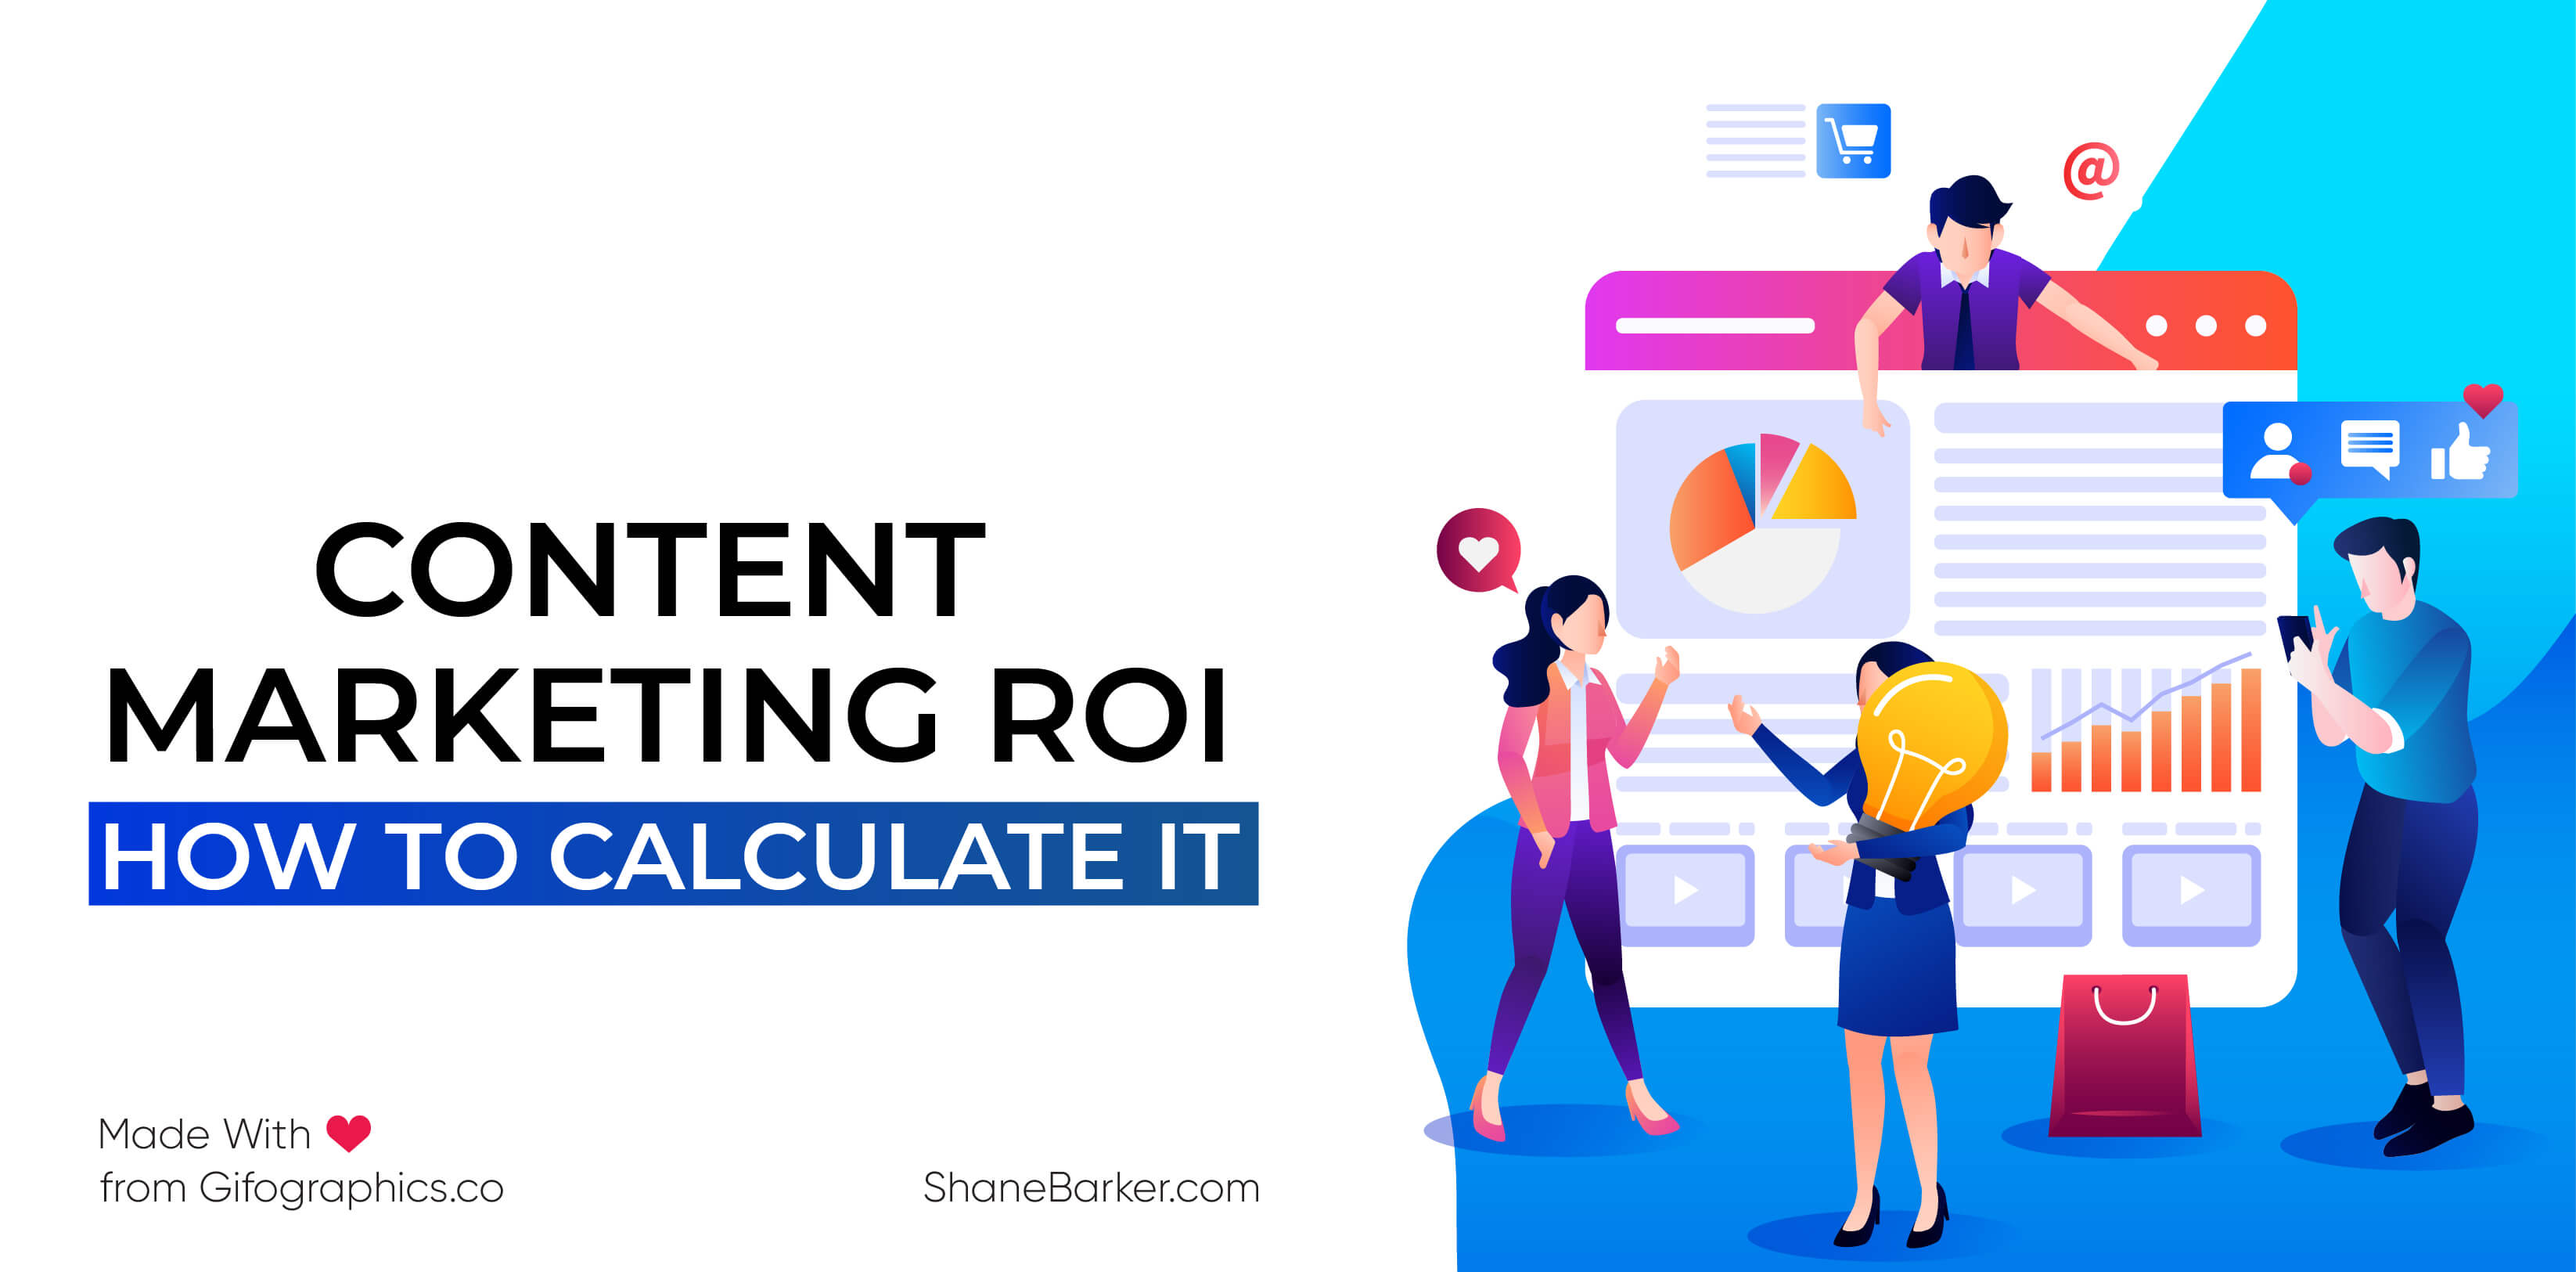 Content Marketing ROI: How to Calculate It